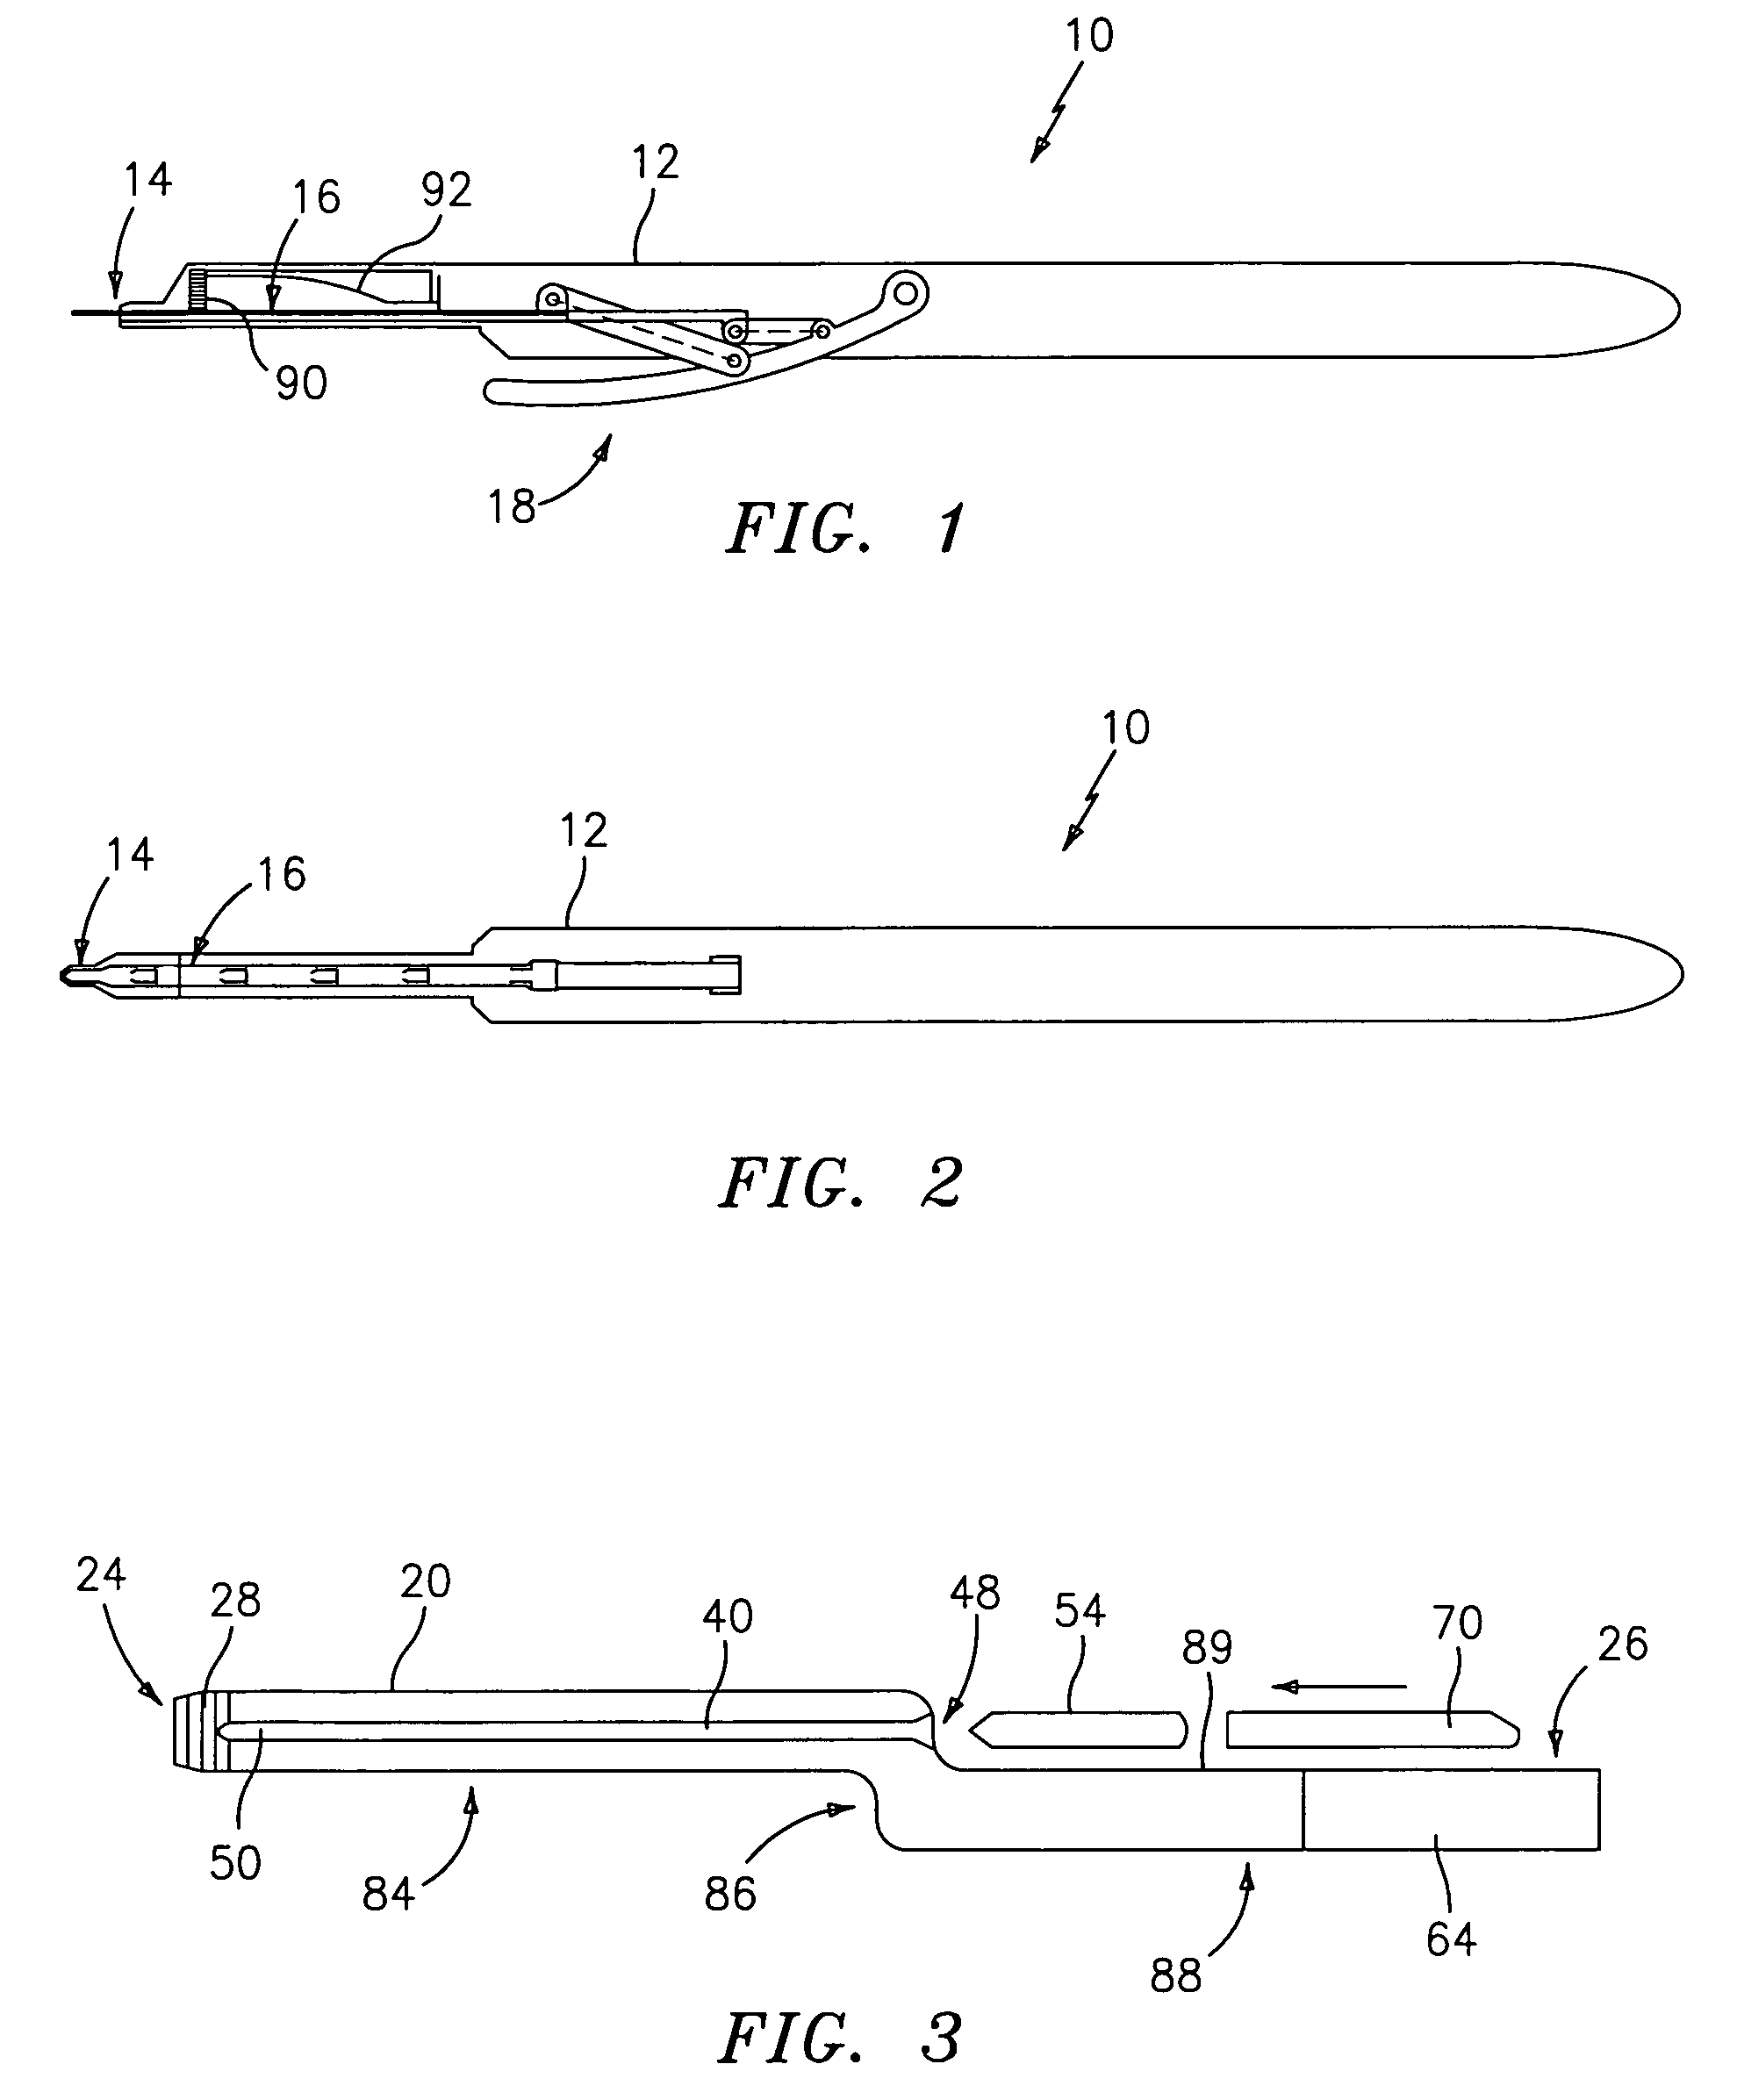 Tissue grasping and clipping/stapling device